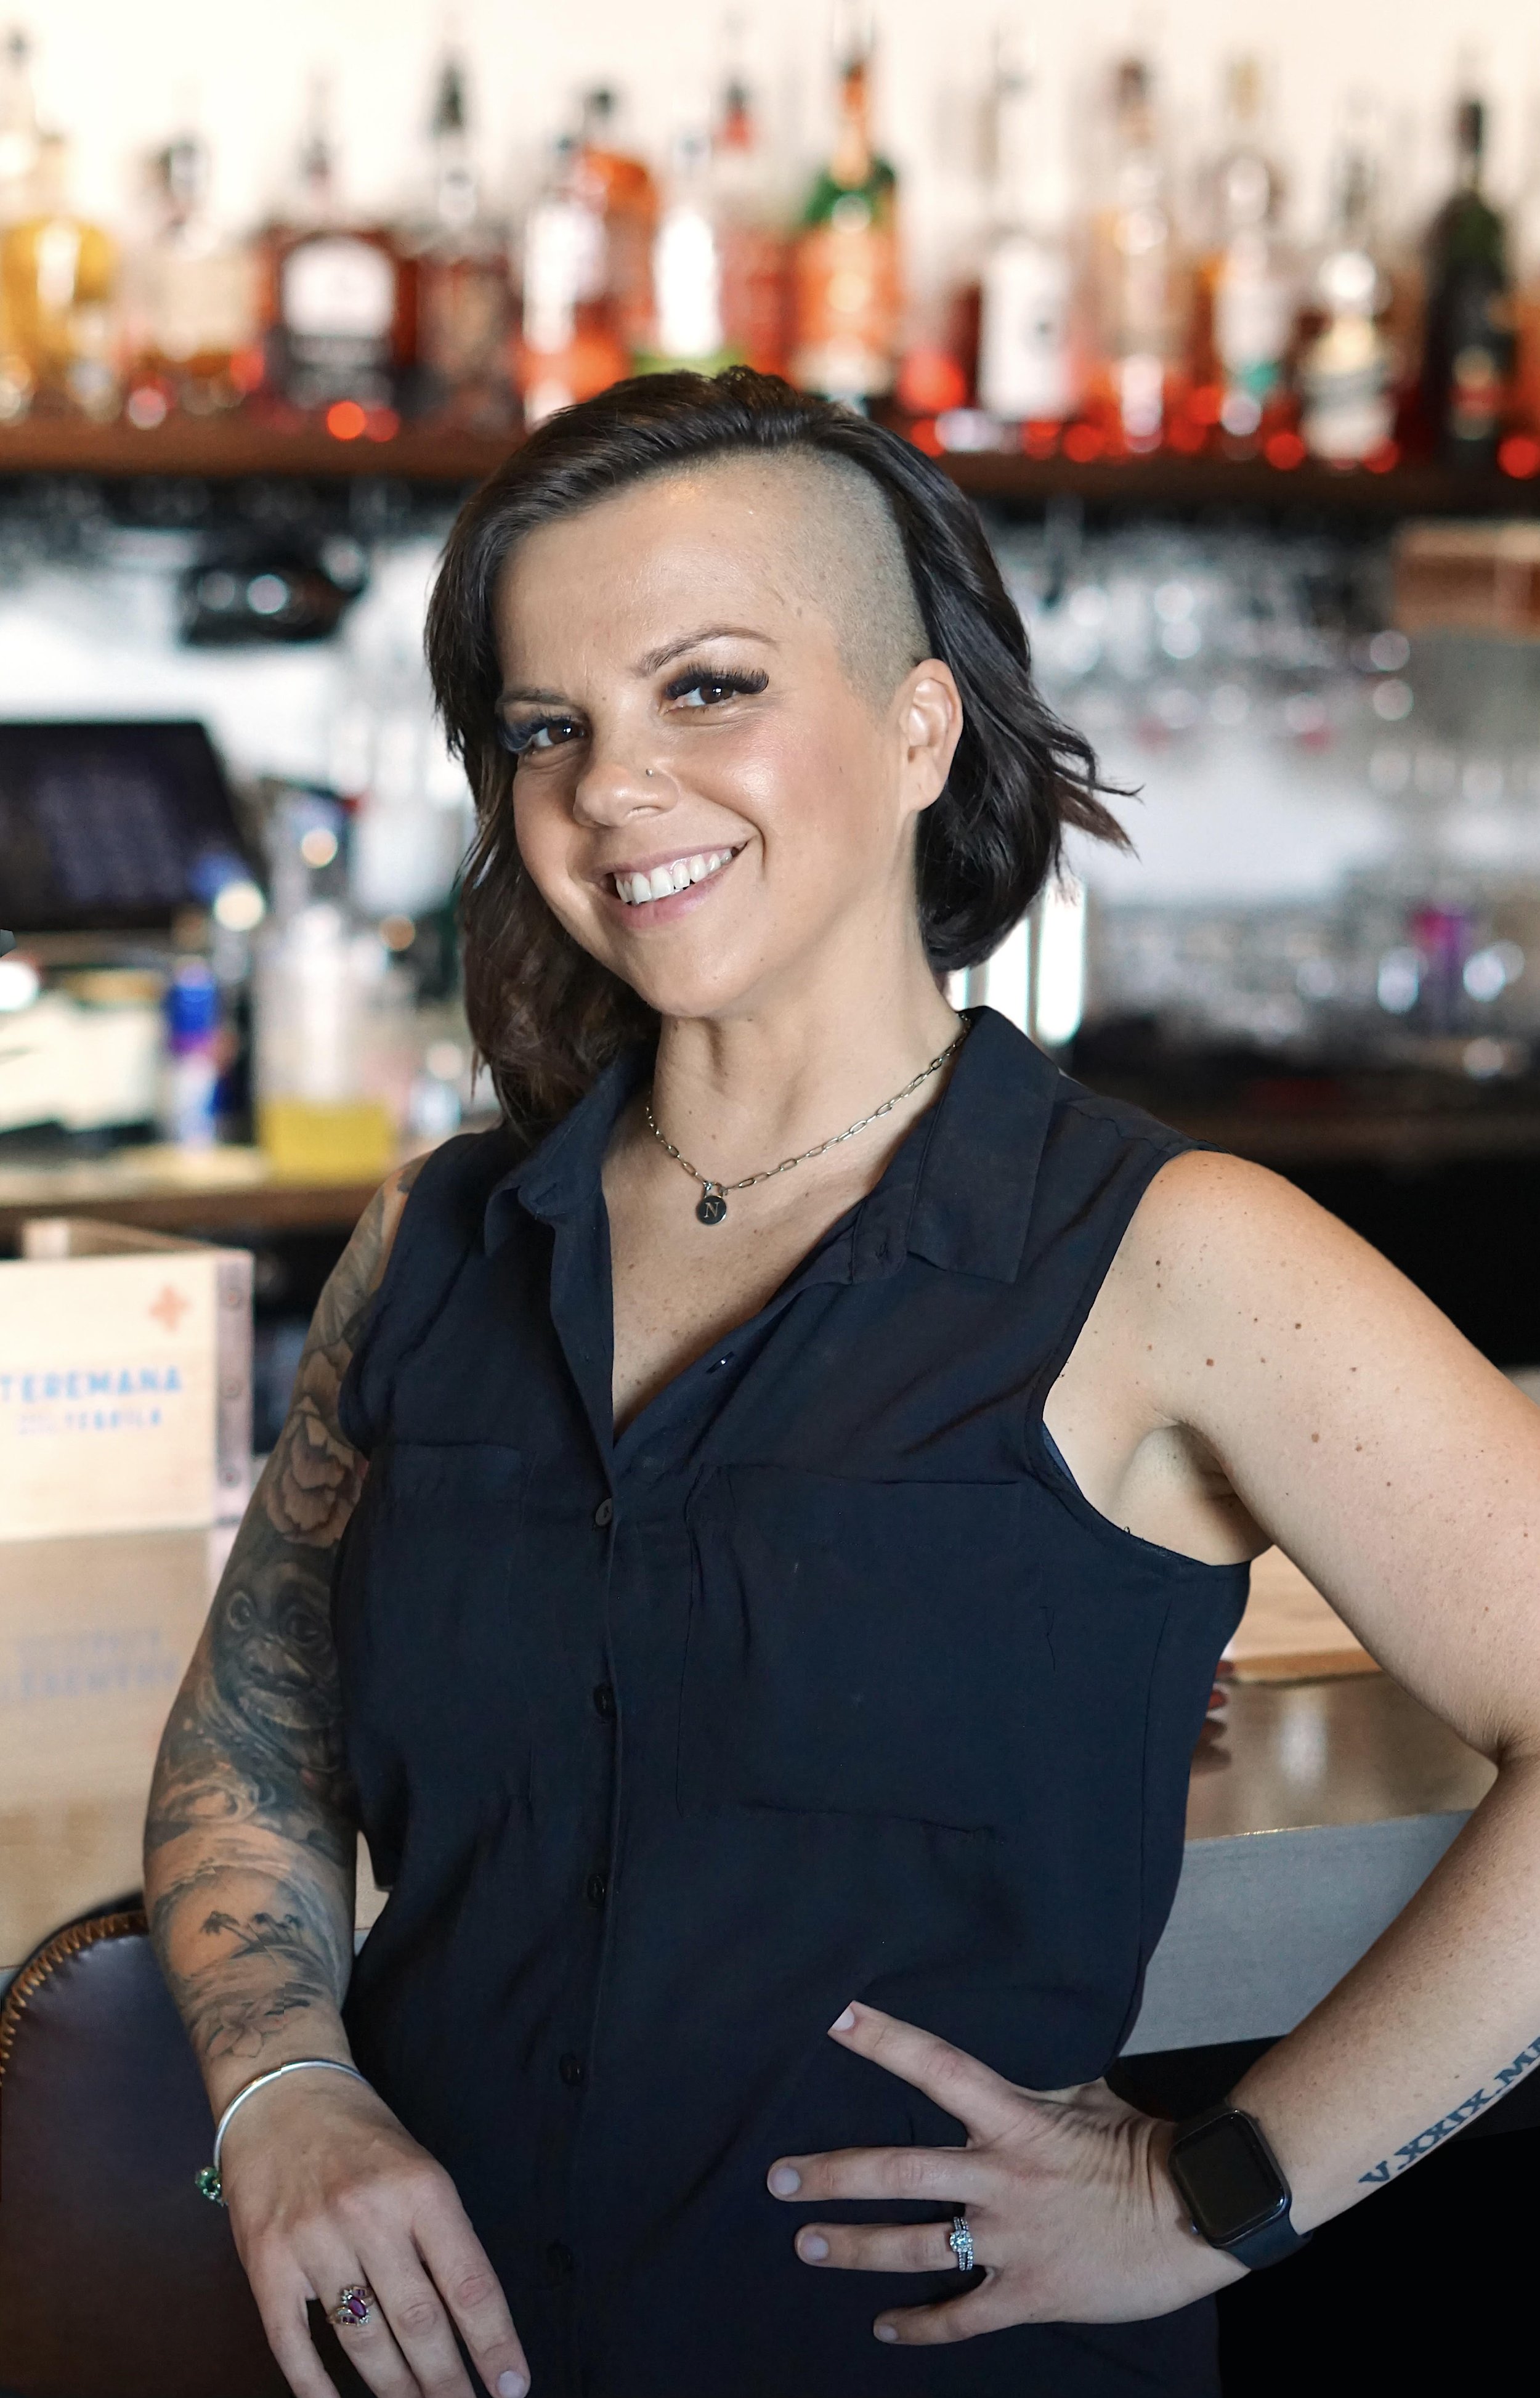 brian agoi recommends Lisa Marie Bar Rescue